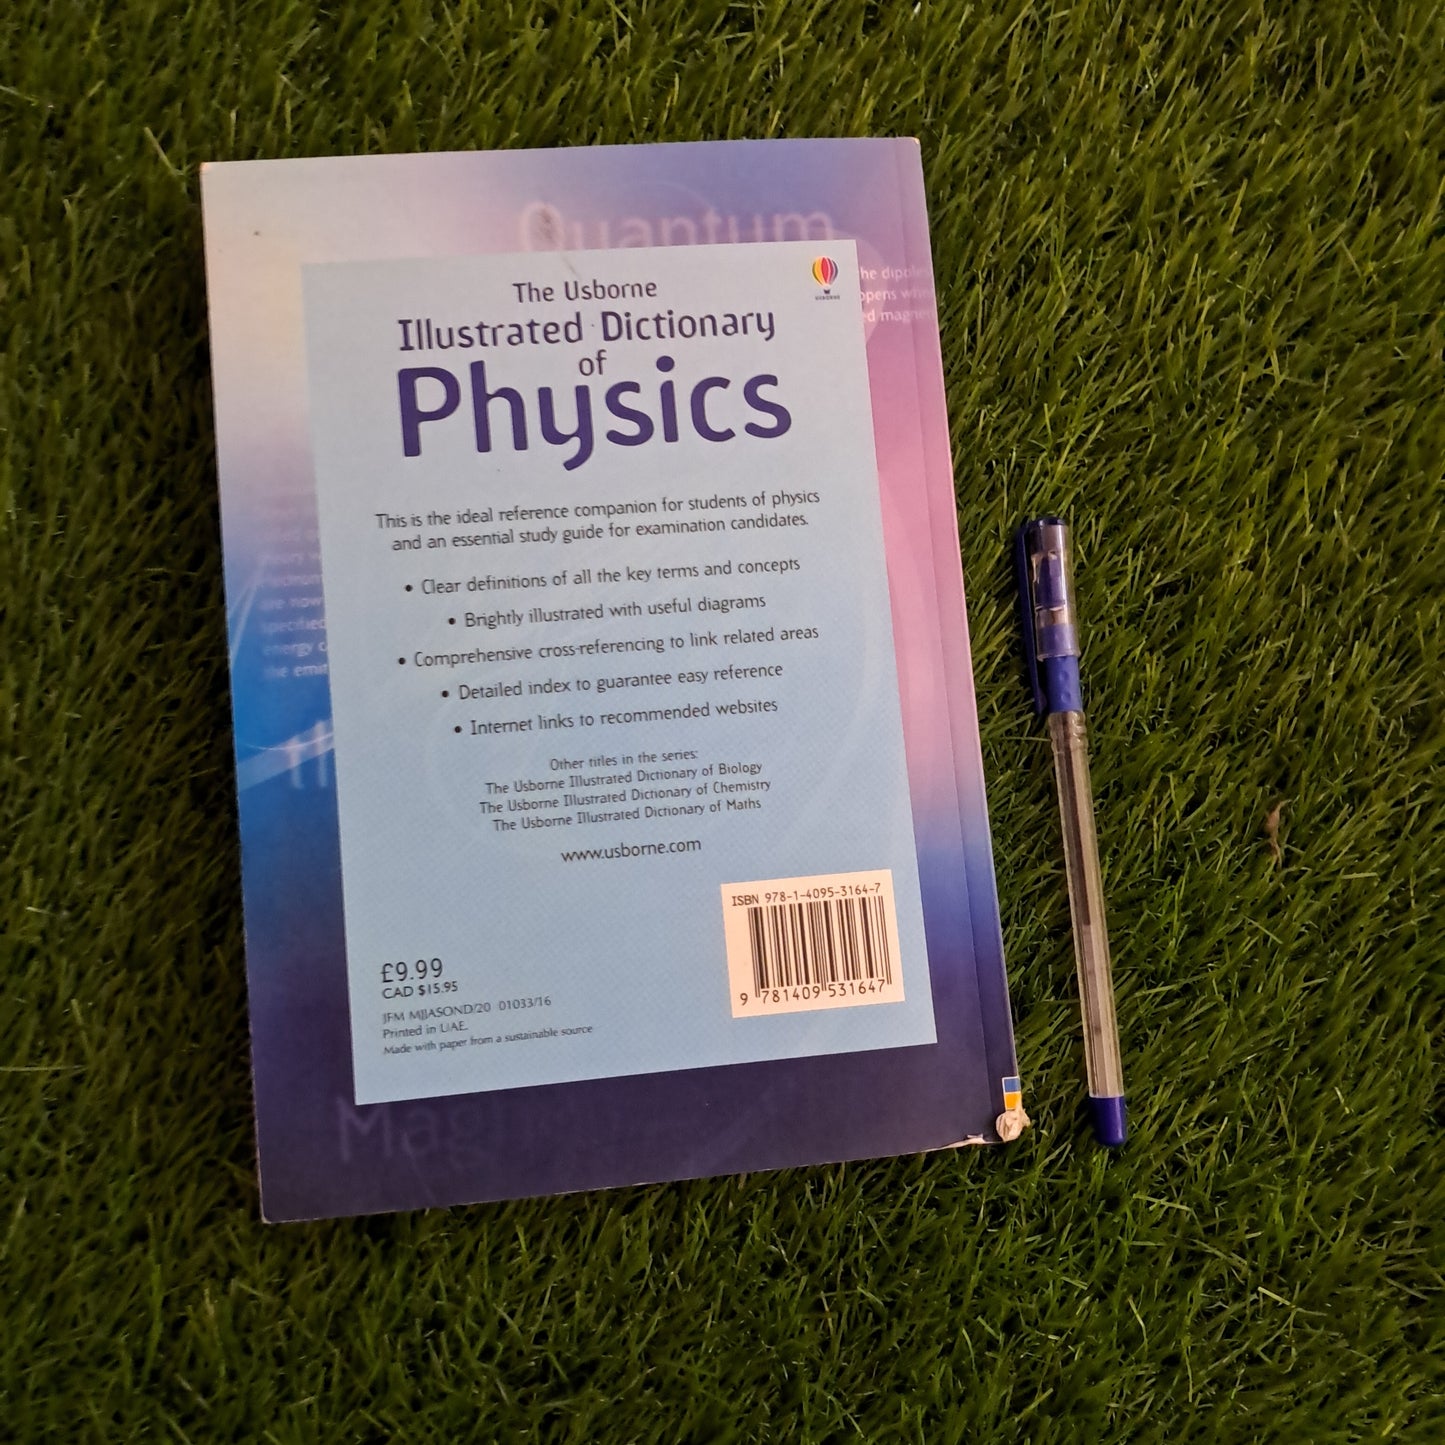 THE UsBORNE ILLUSTRATEd Dictionary of Physics